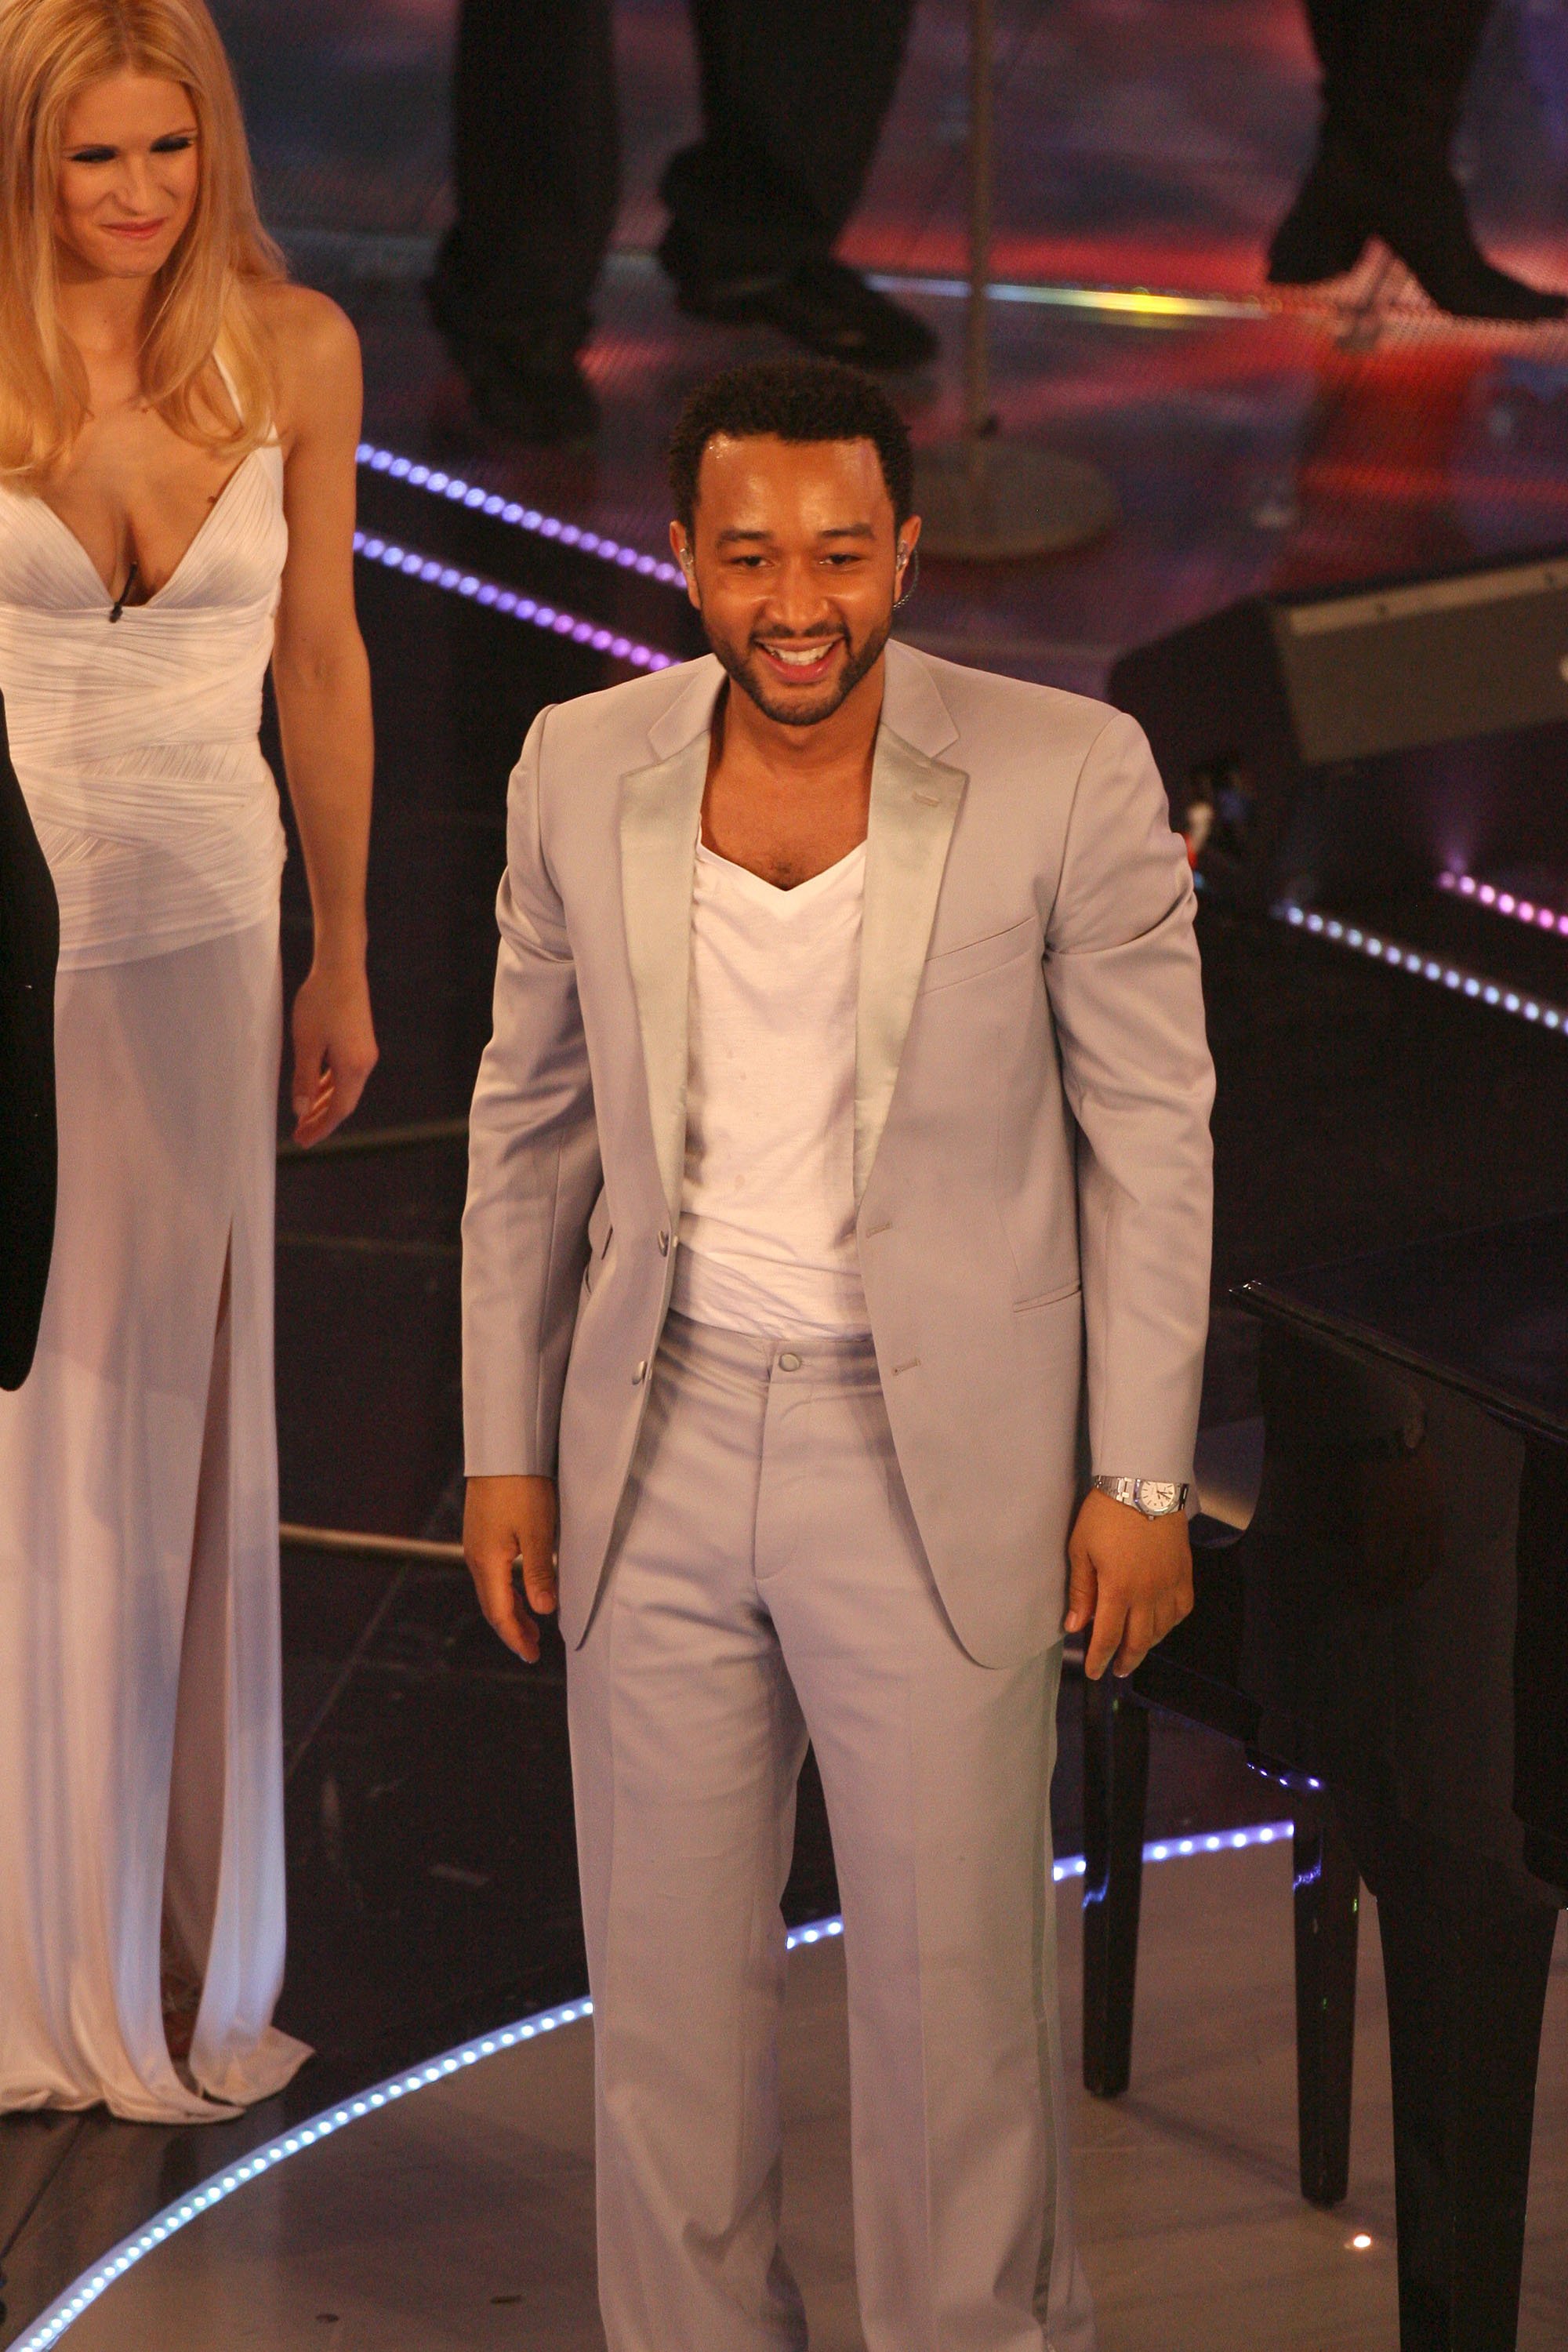 John Legend on stage at Teatro Ariston Concert in San Remo, Italy | Source: Getty Images